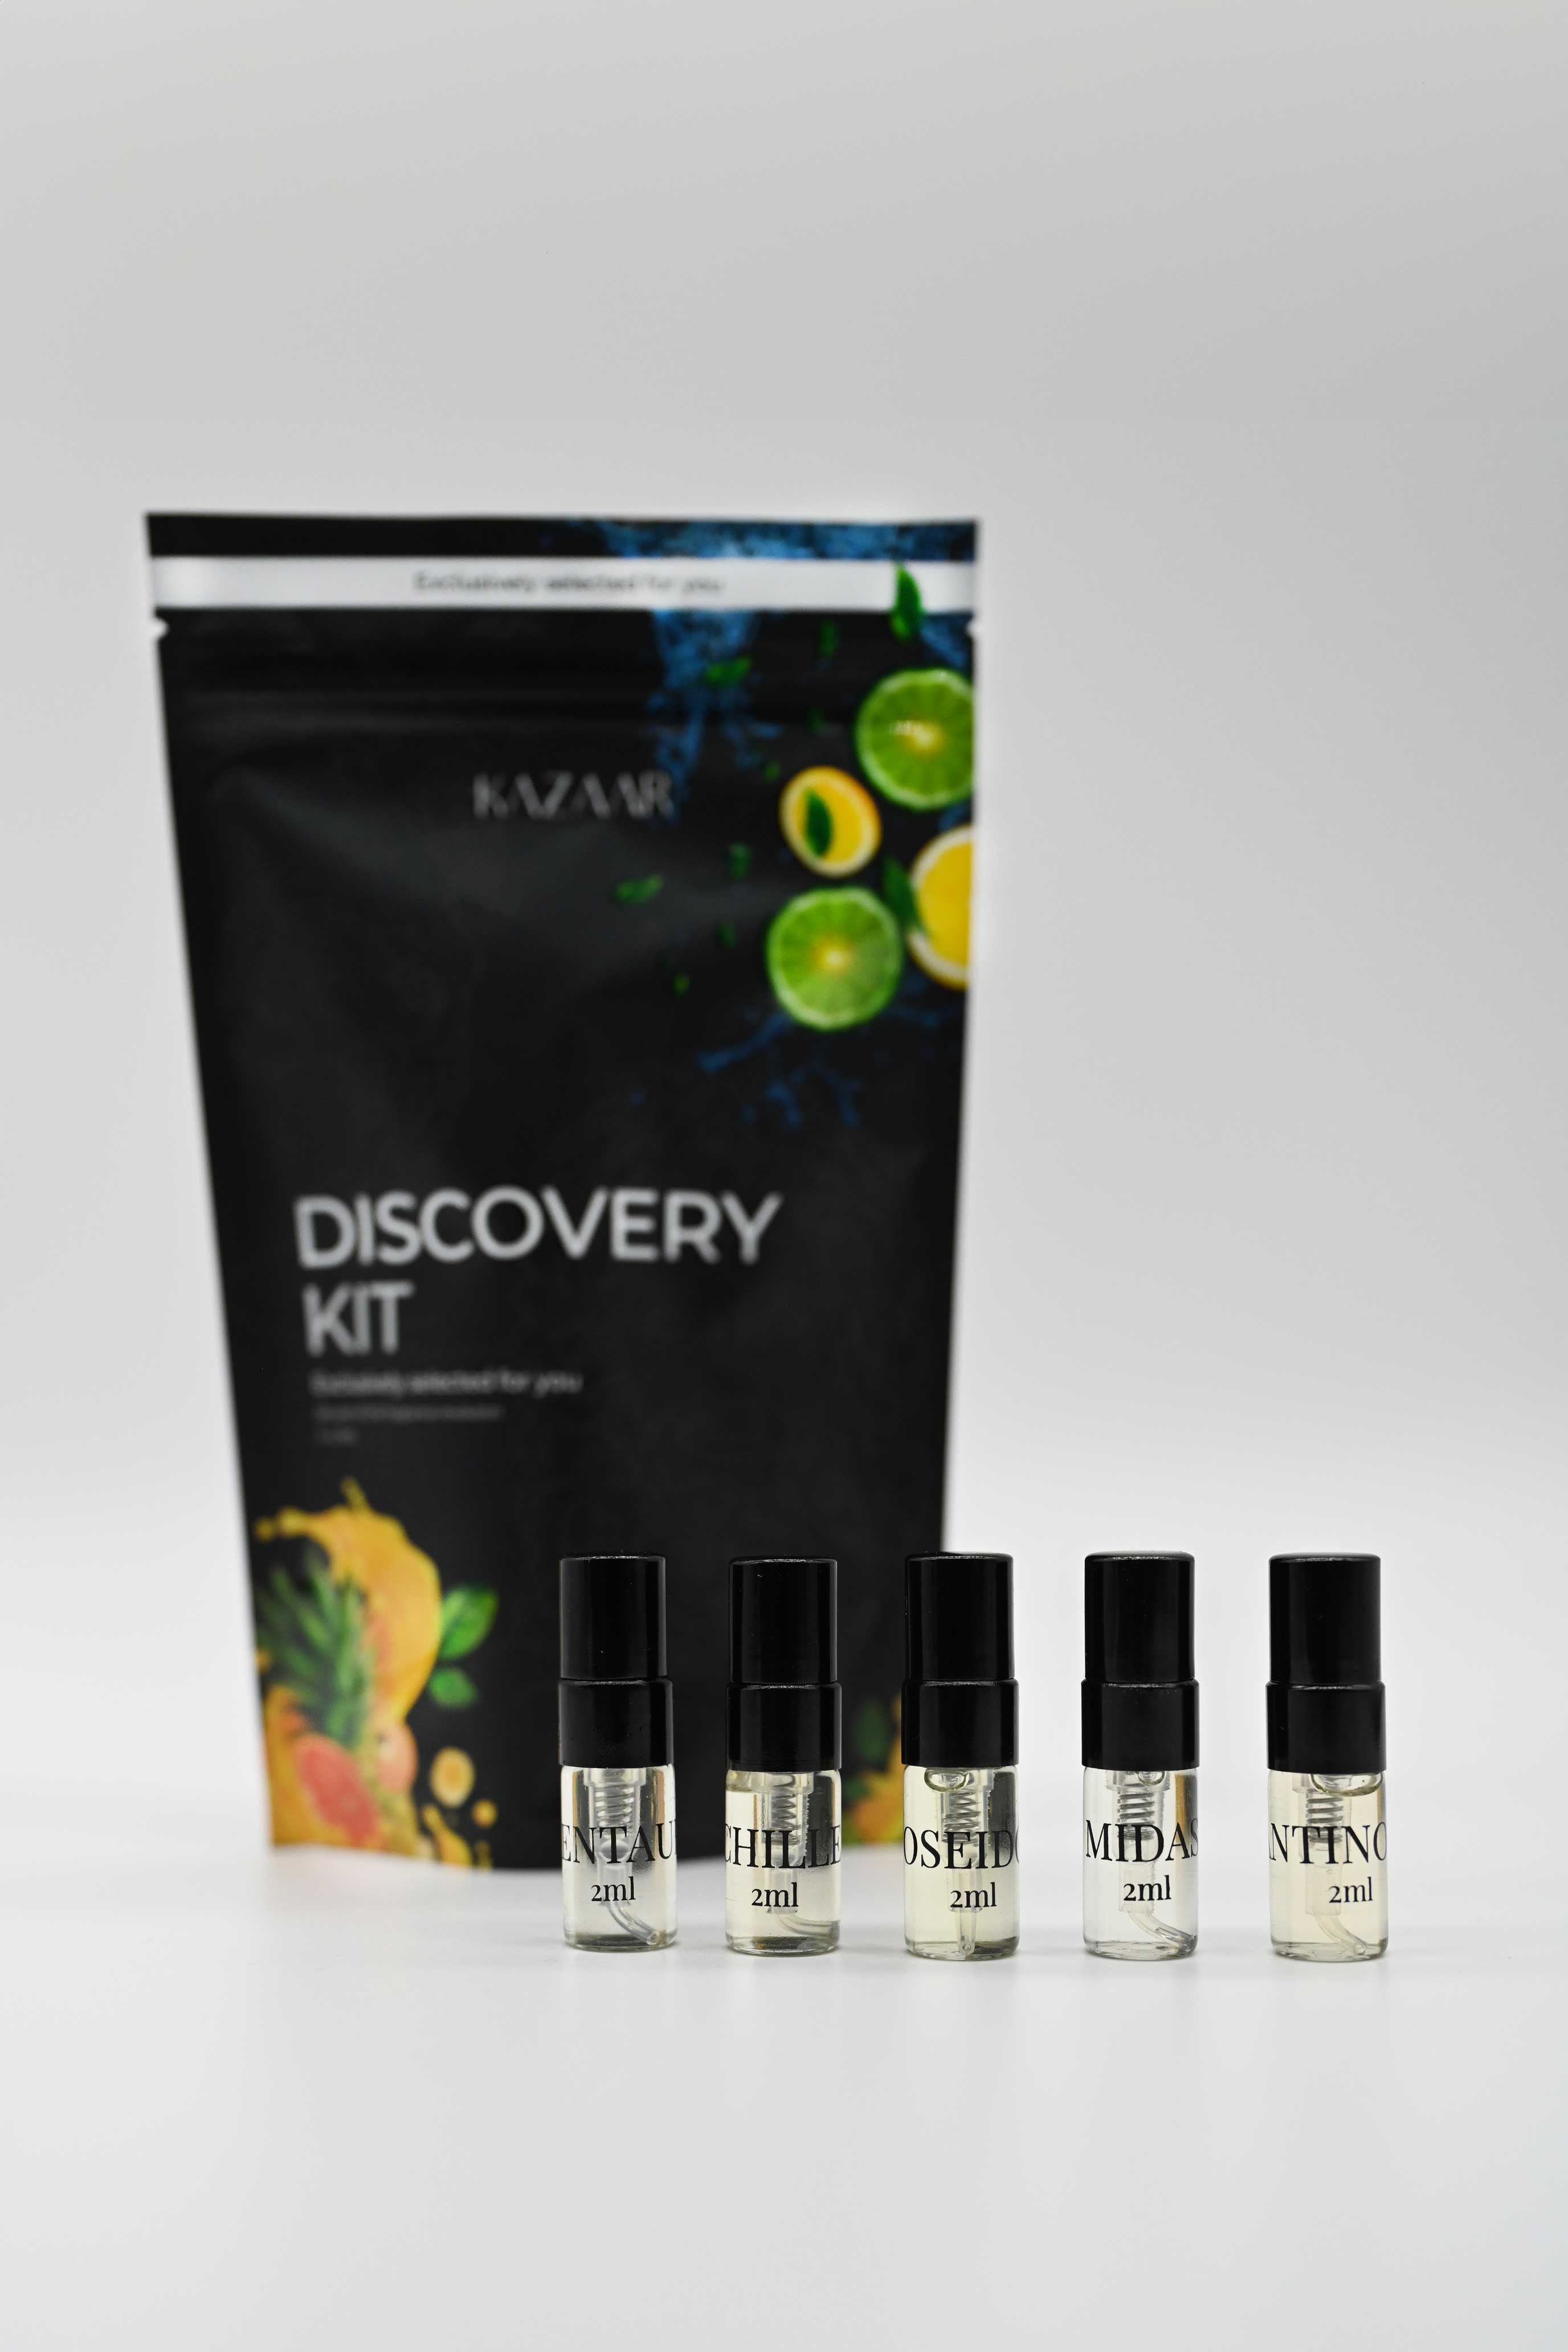 DISCOVERY KIT